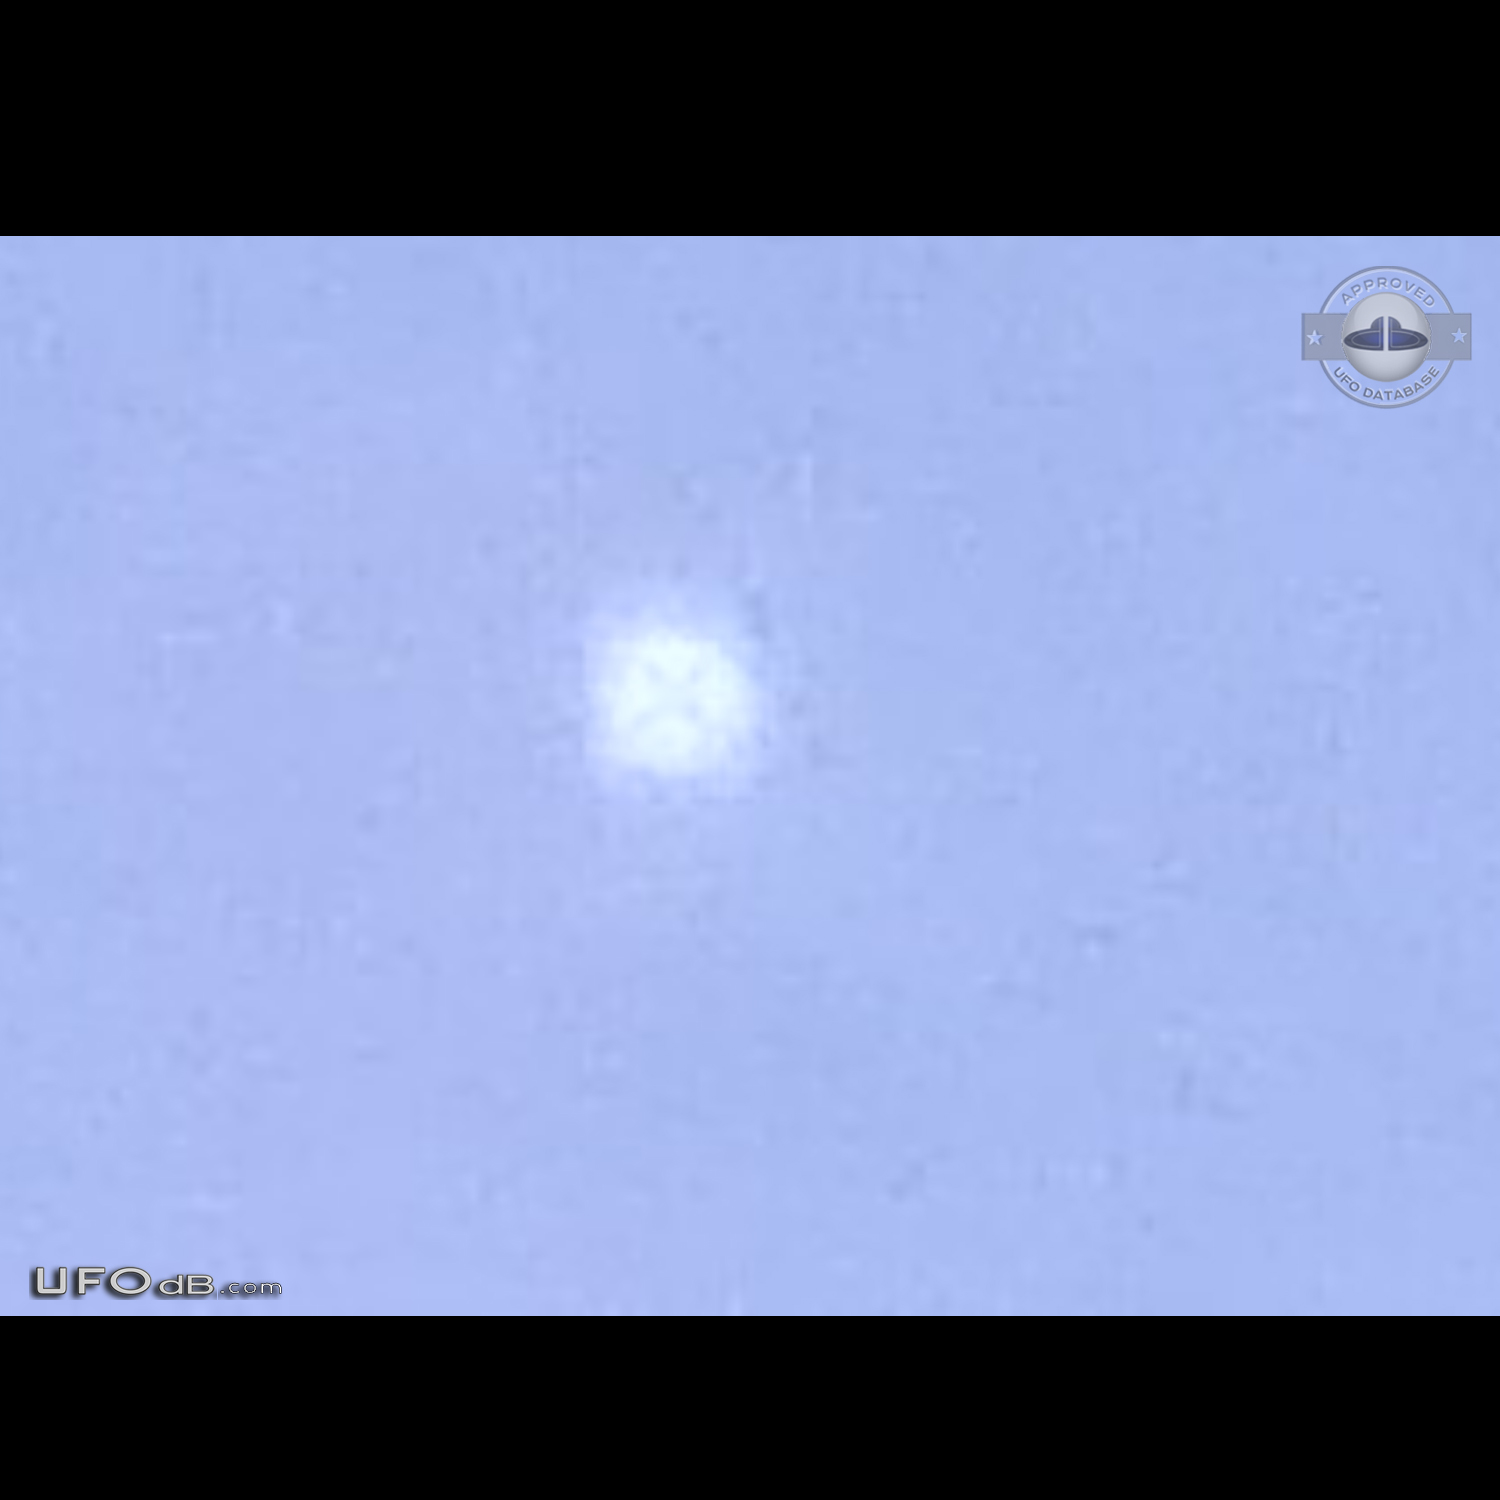 Star like ufo keeps hovering at one spot - Rotterdam Netherlands 2015 UFO Picture #726-1